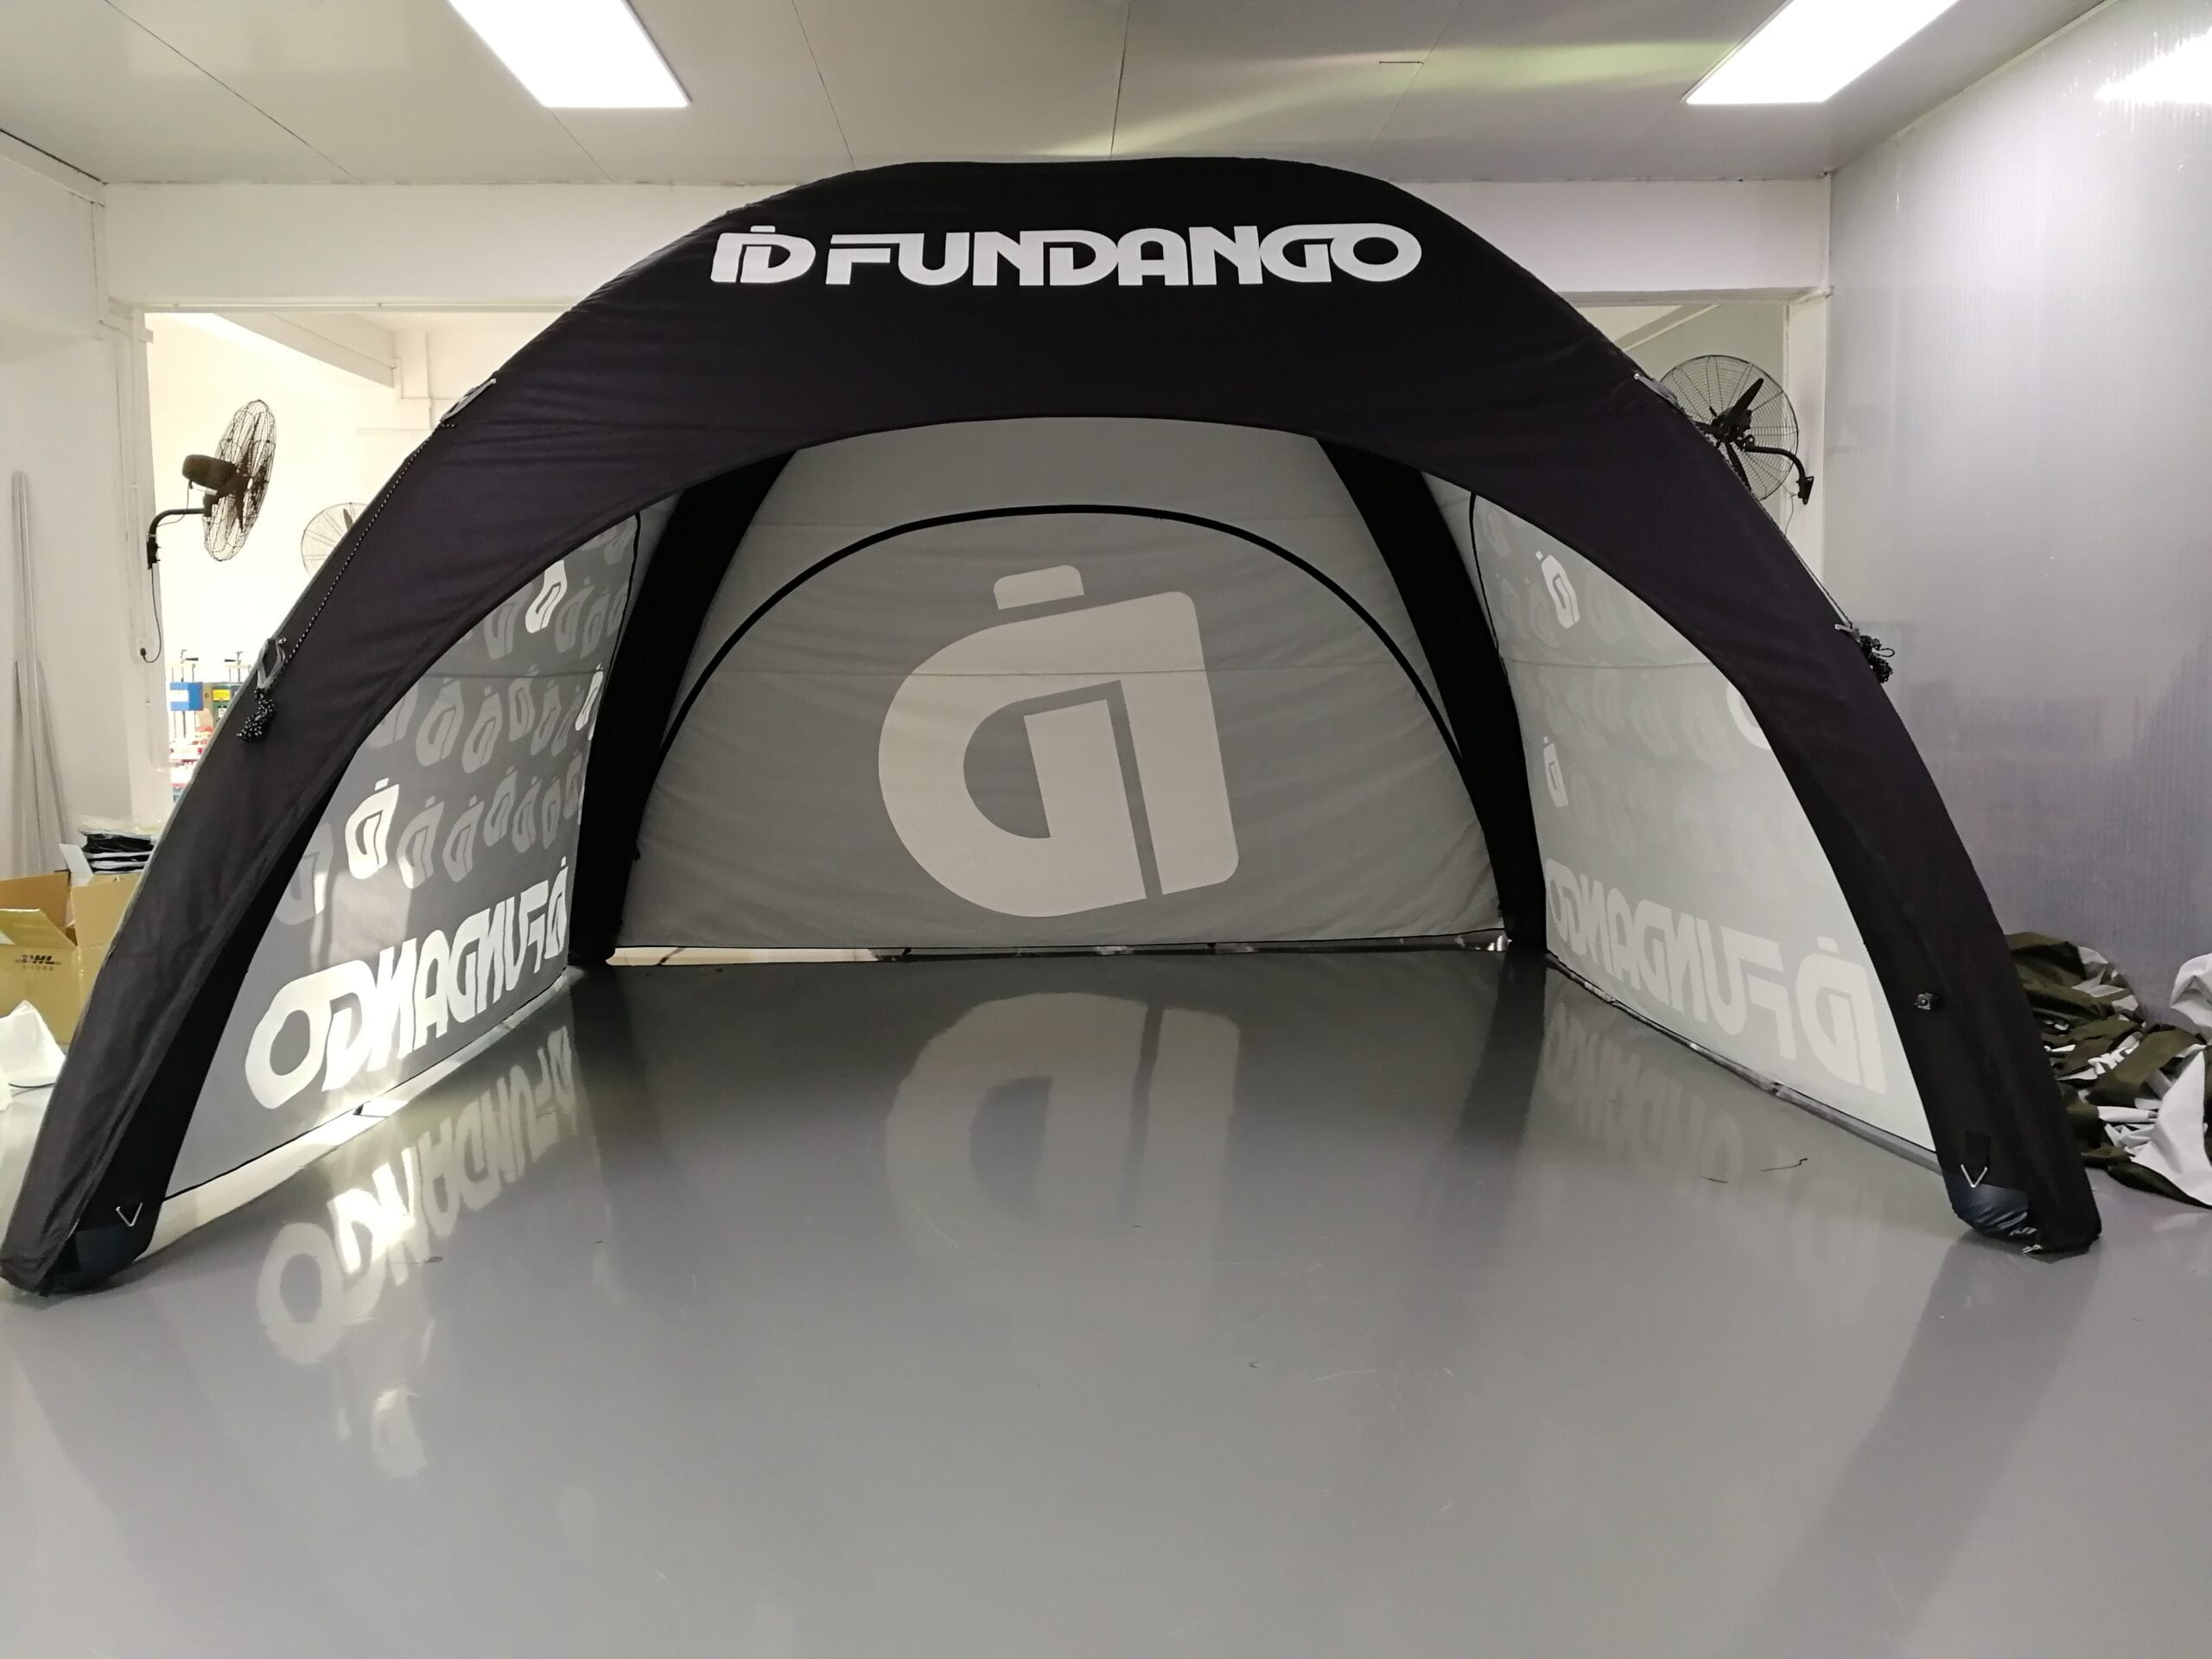 advertising inflatables tent